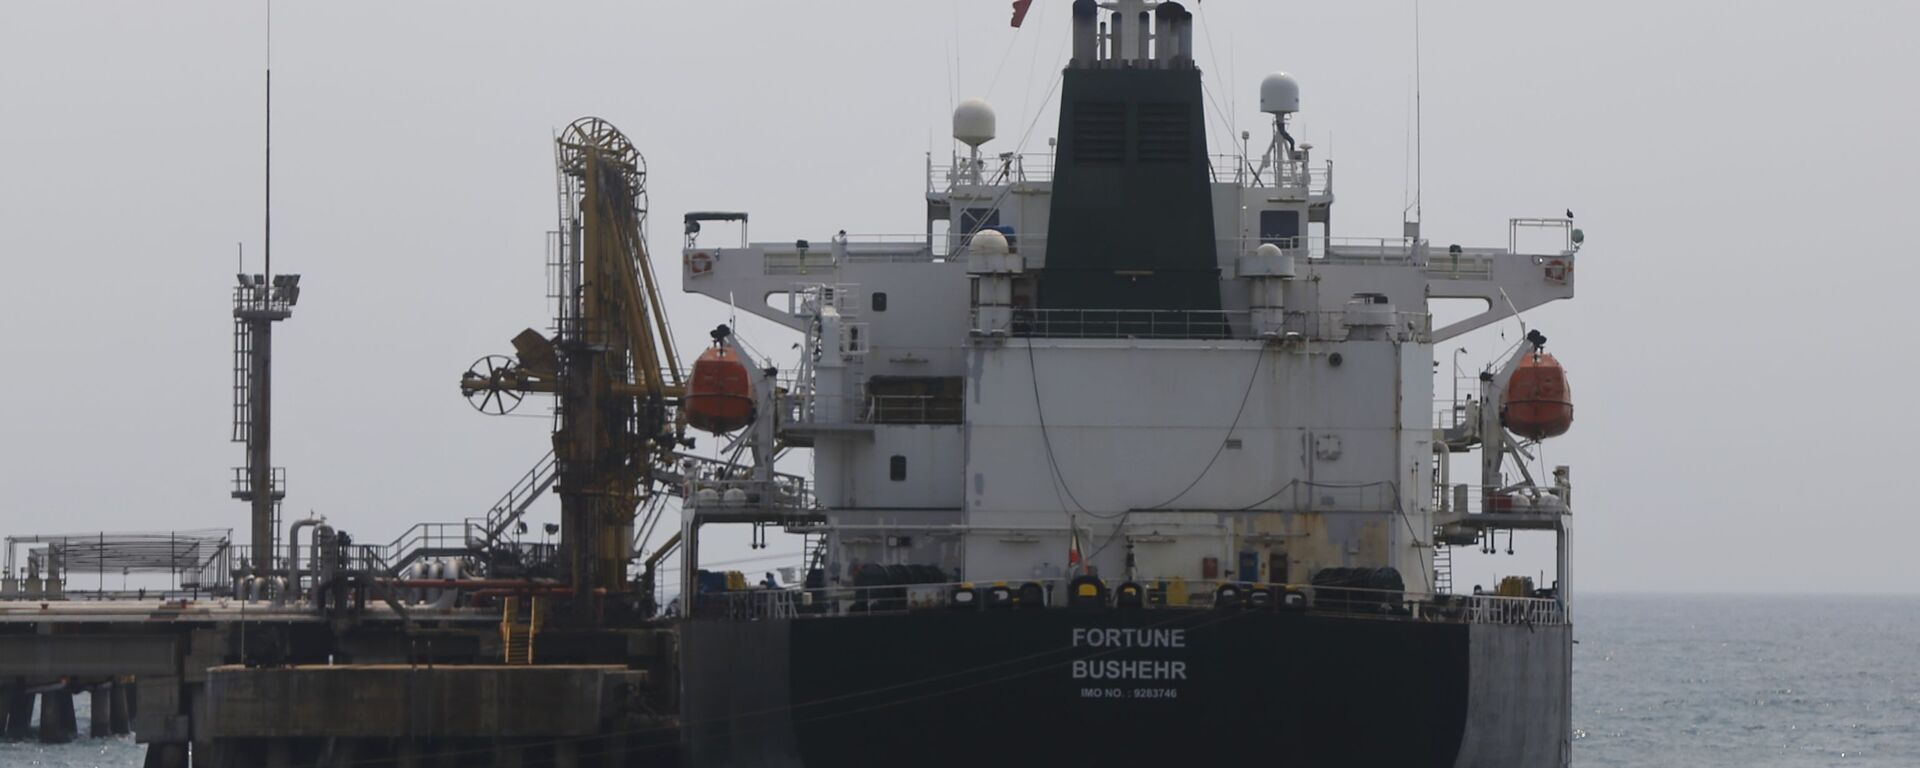 Iranian oil tanker Fortune is anchored at the dock of the El Palito refinery near Puerto Cabello, Venezuela, Monday, 25 May 2020 - Sputnik International, 1920, 09.04.2021